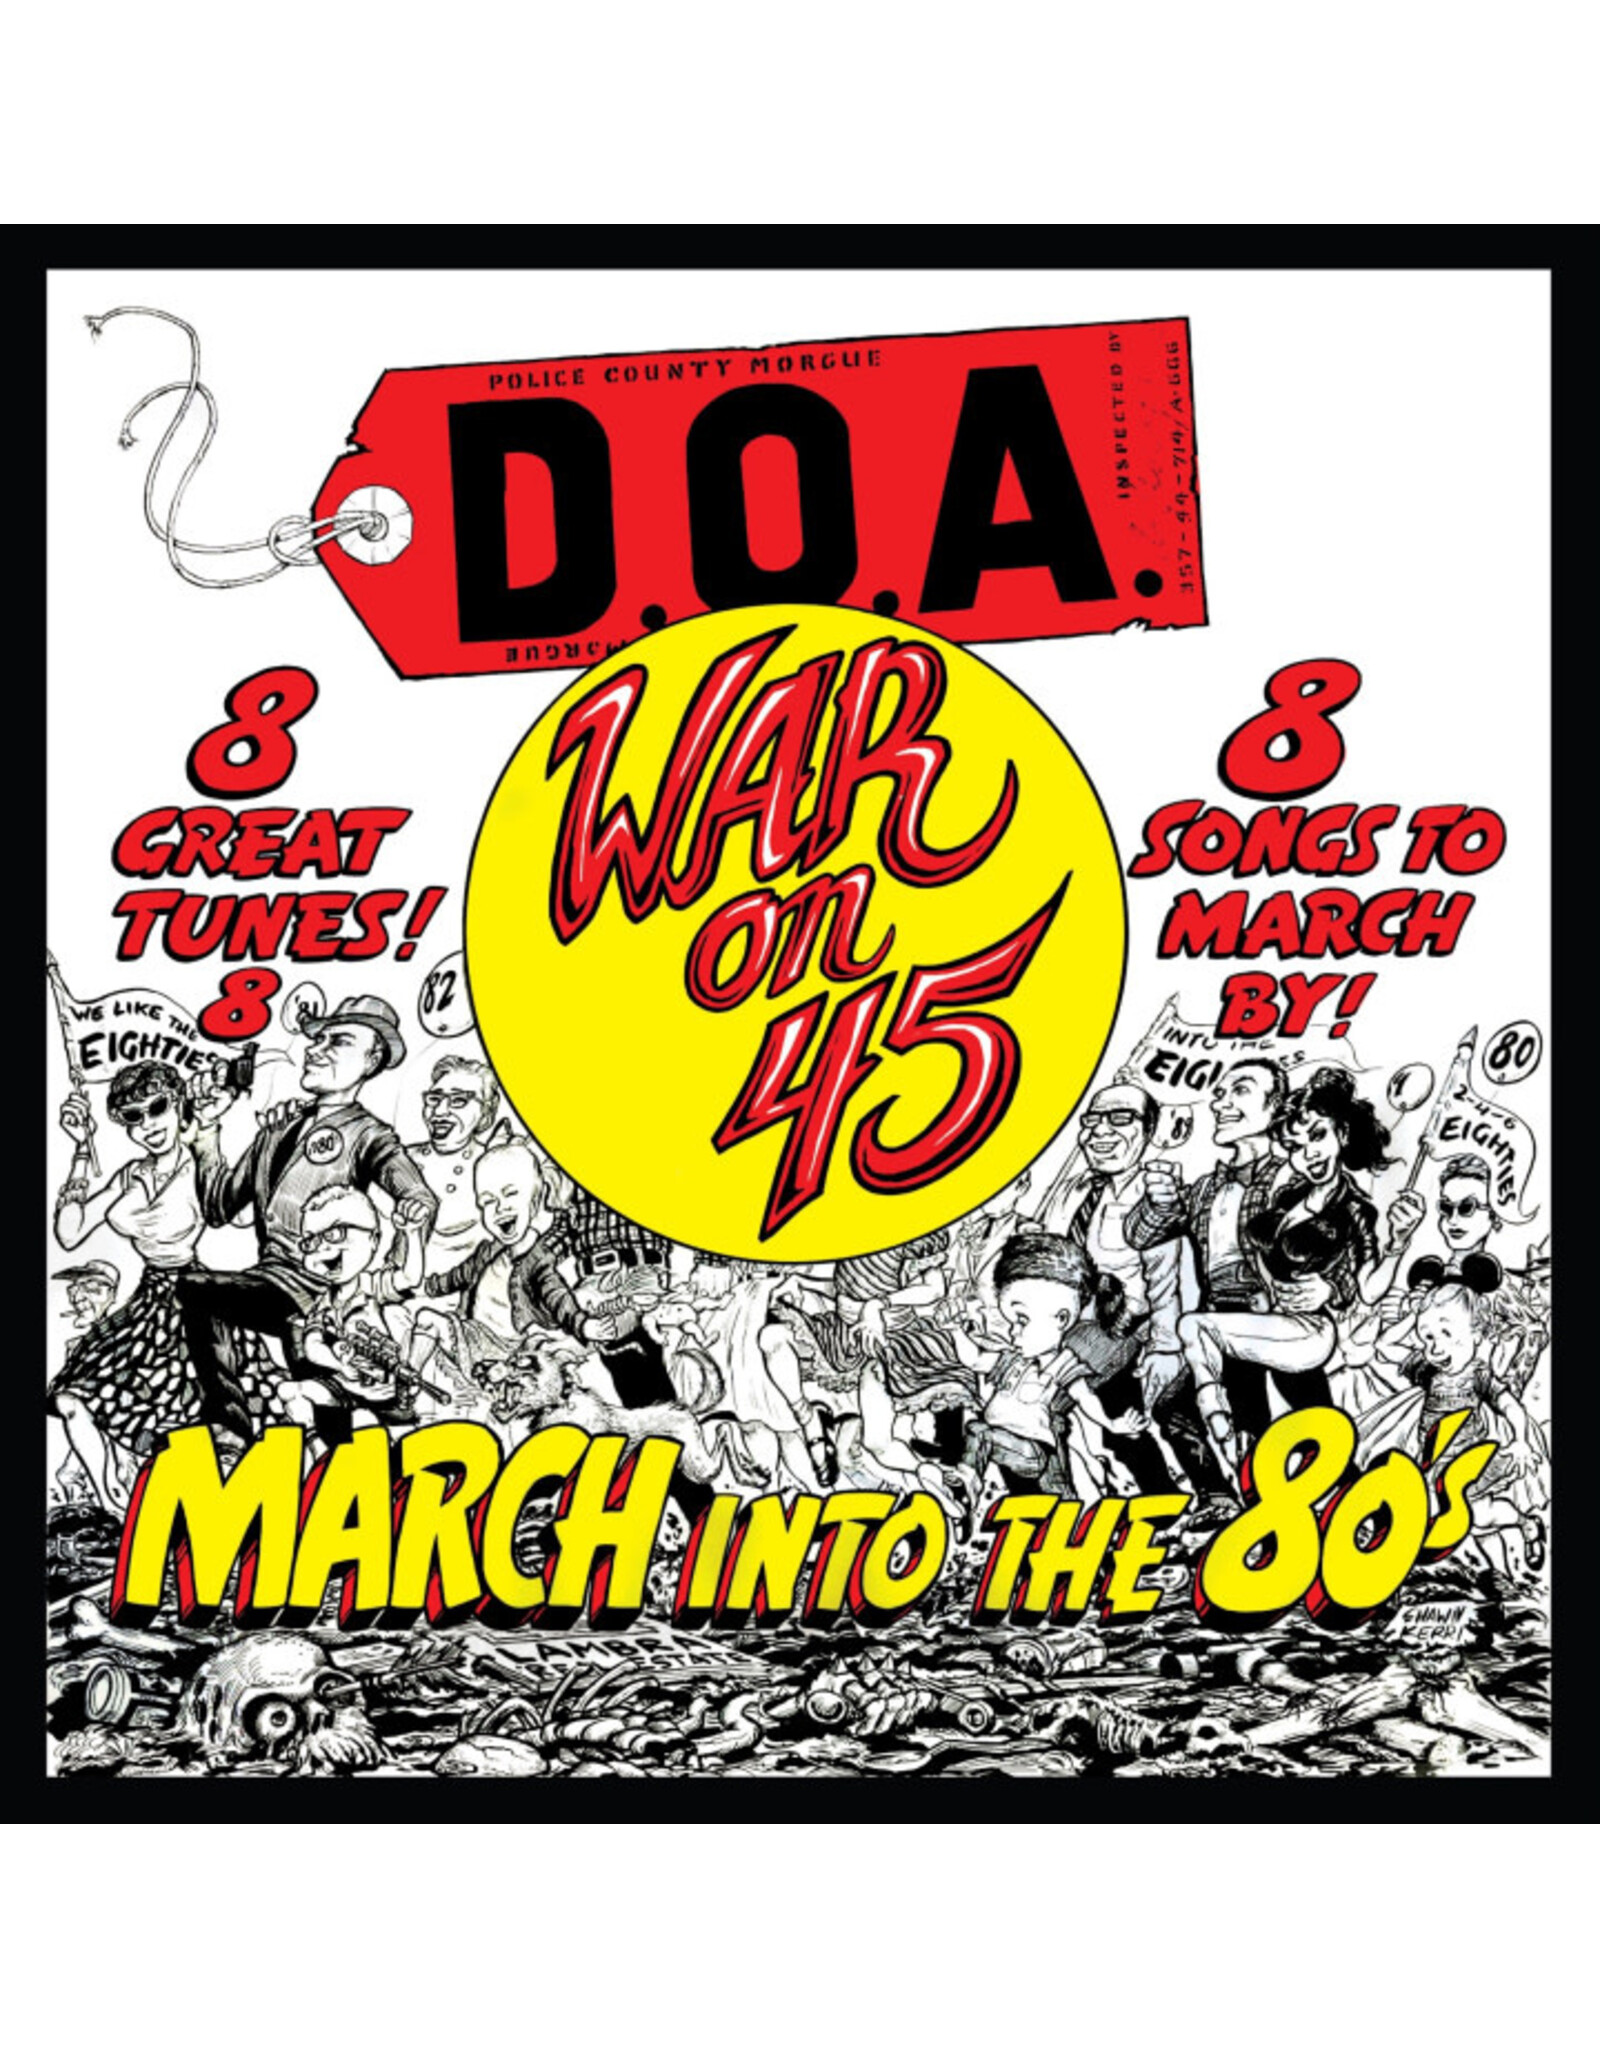 D.O.A. - Ware On 45 (40th Anniversary Cherry Red) LP